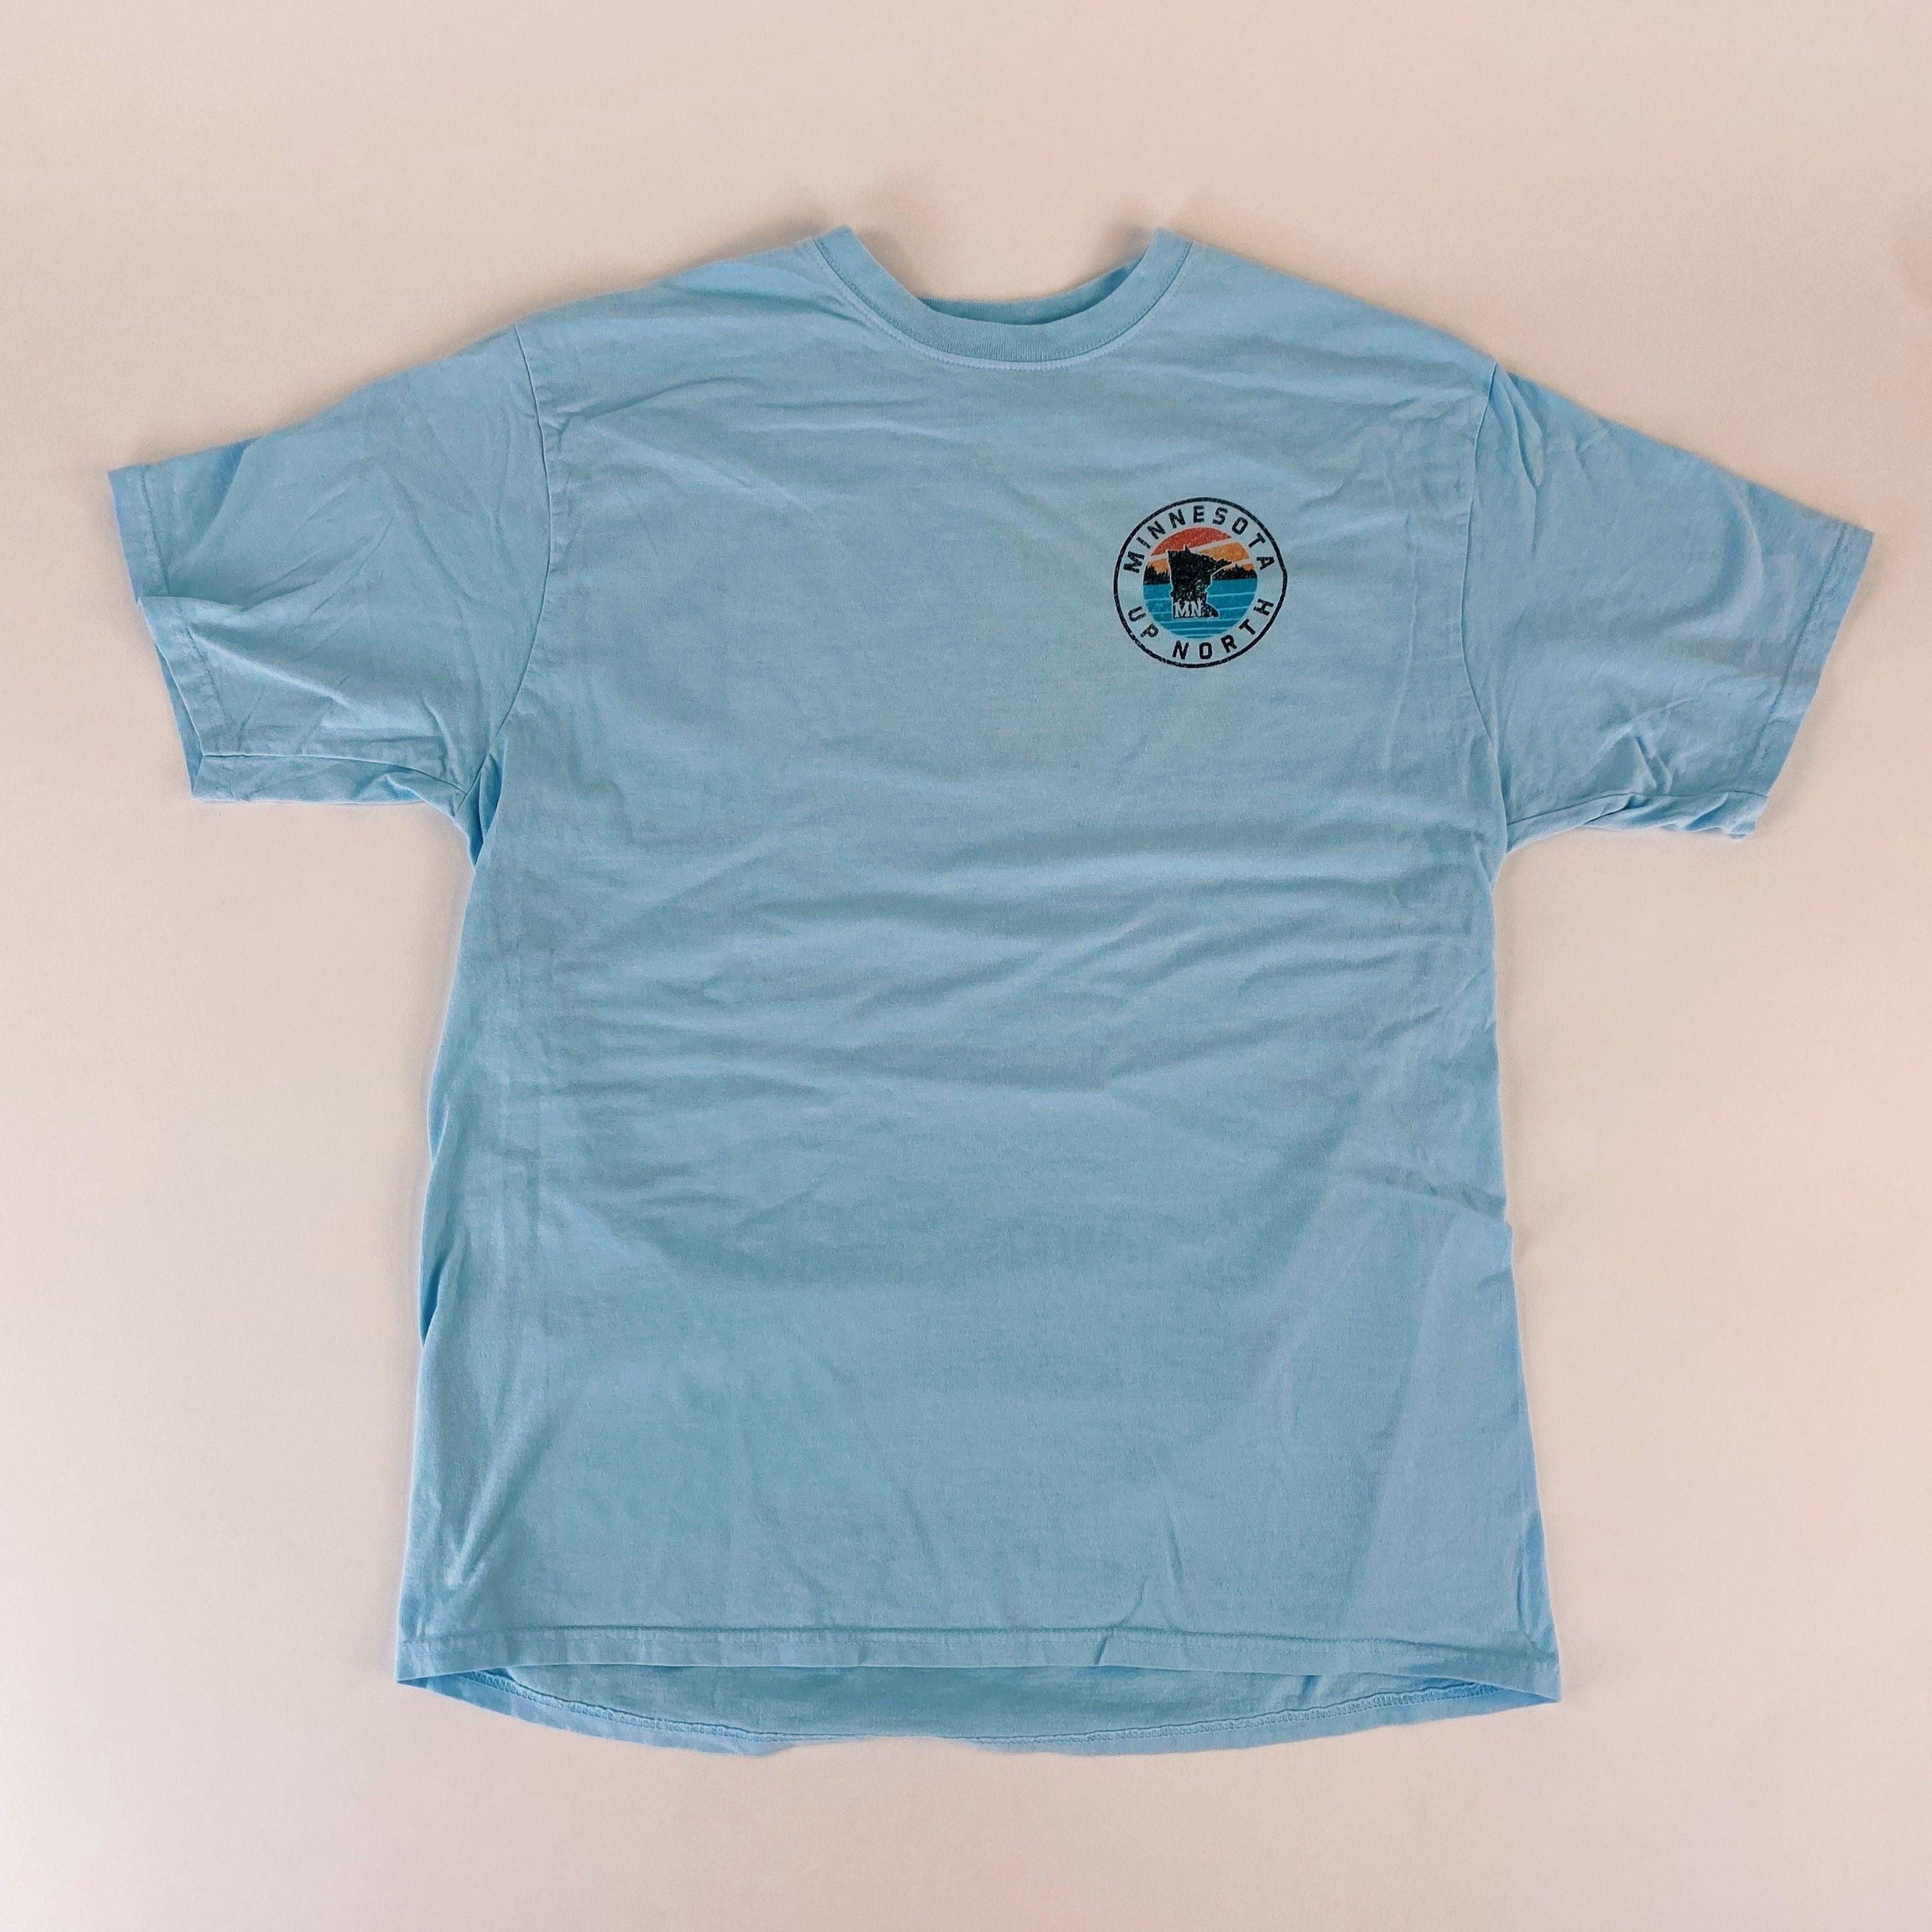 Up North Explorer Tee – Love From USA